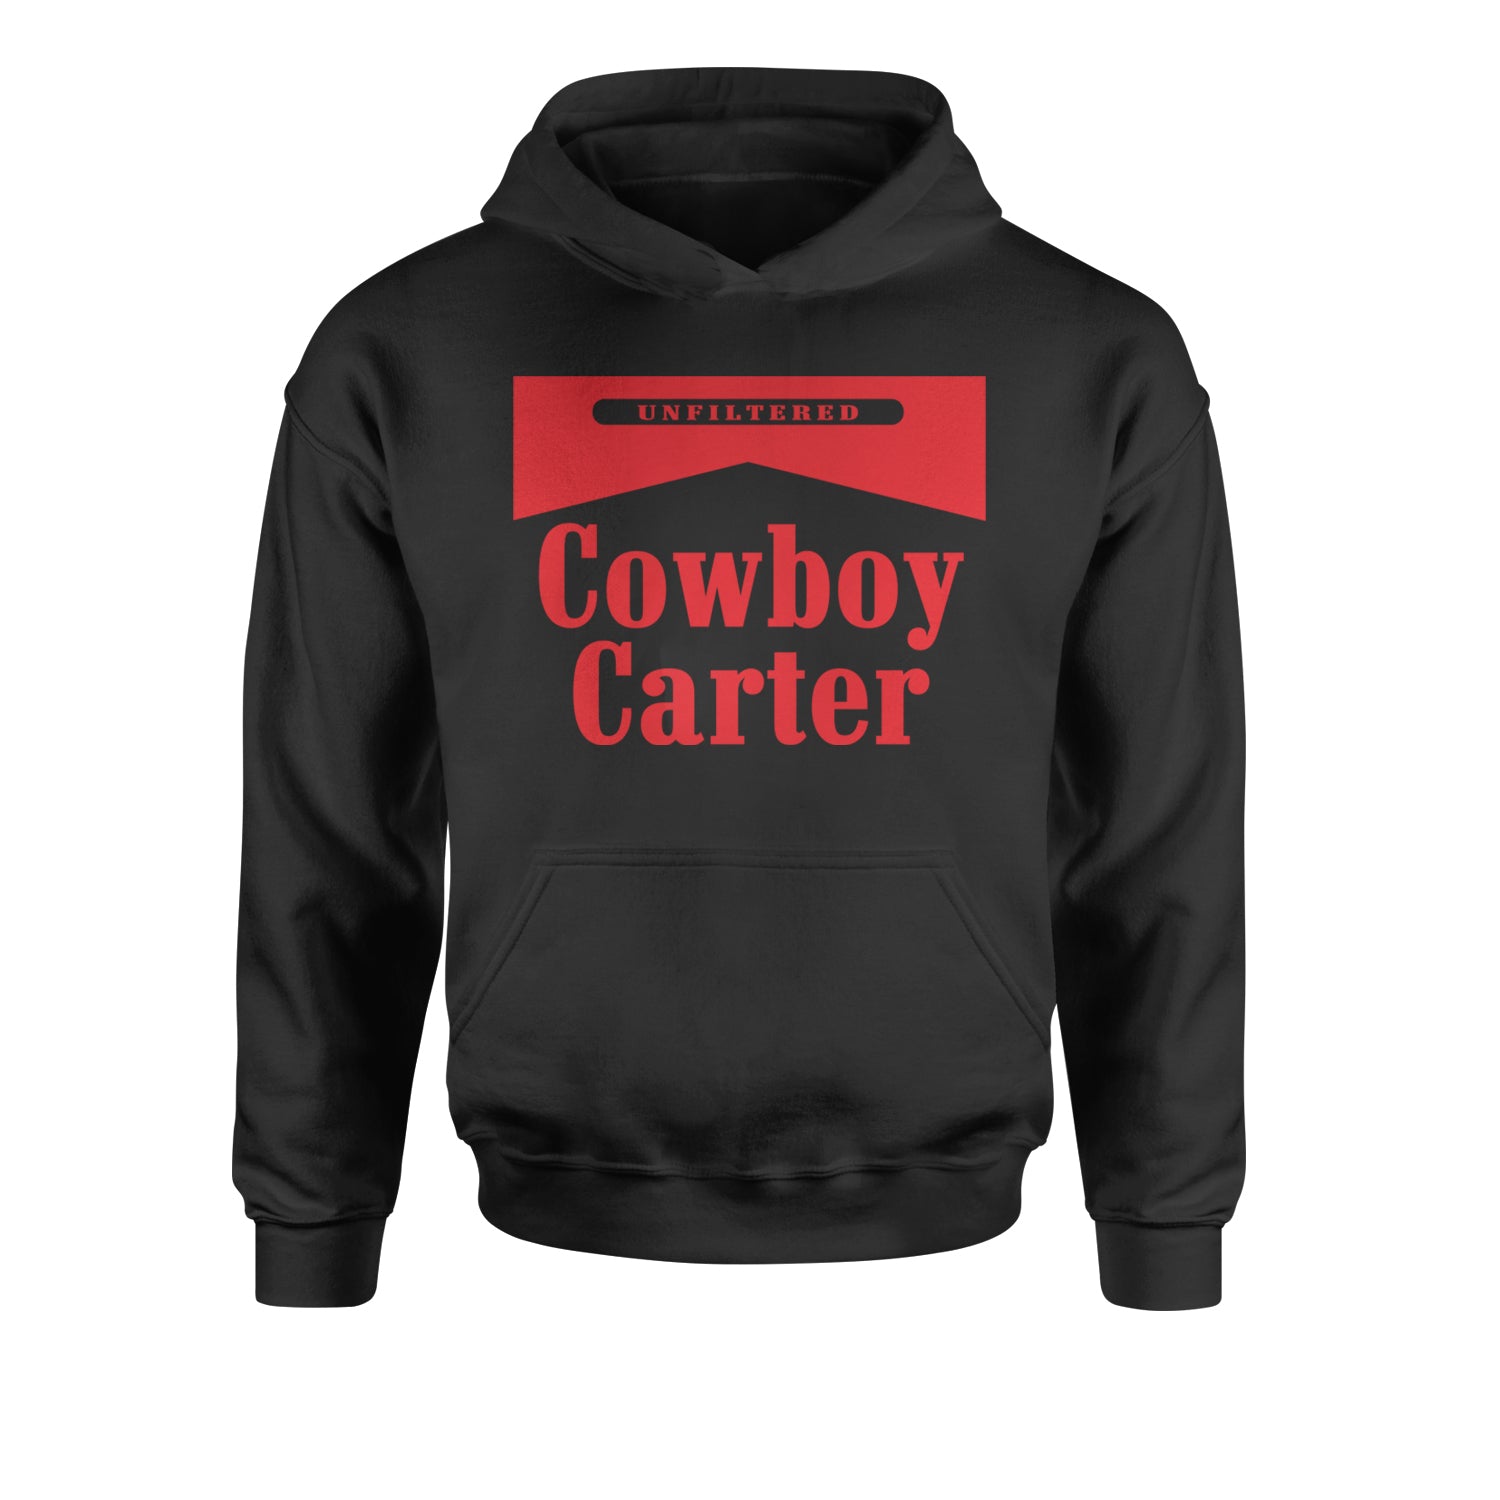 Cowboy Carter Country Act Two Youth-Sized Hoodie